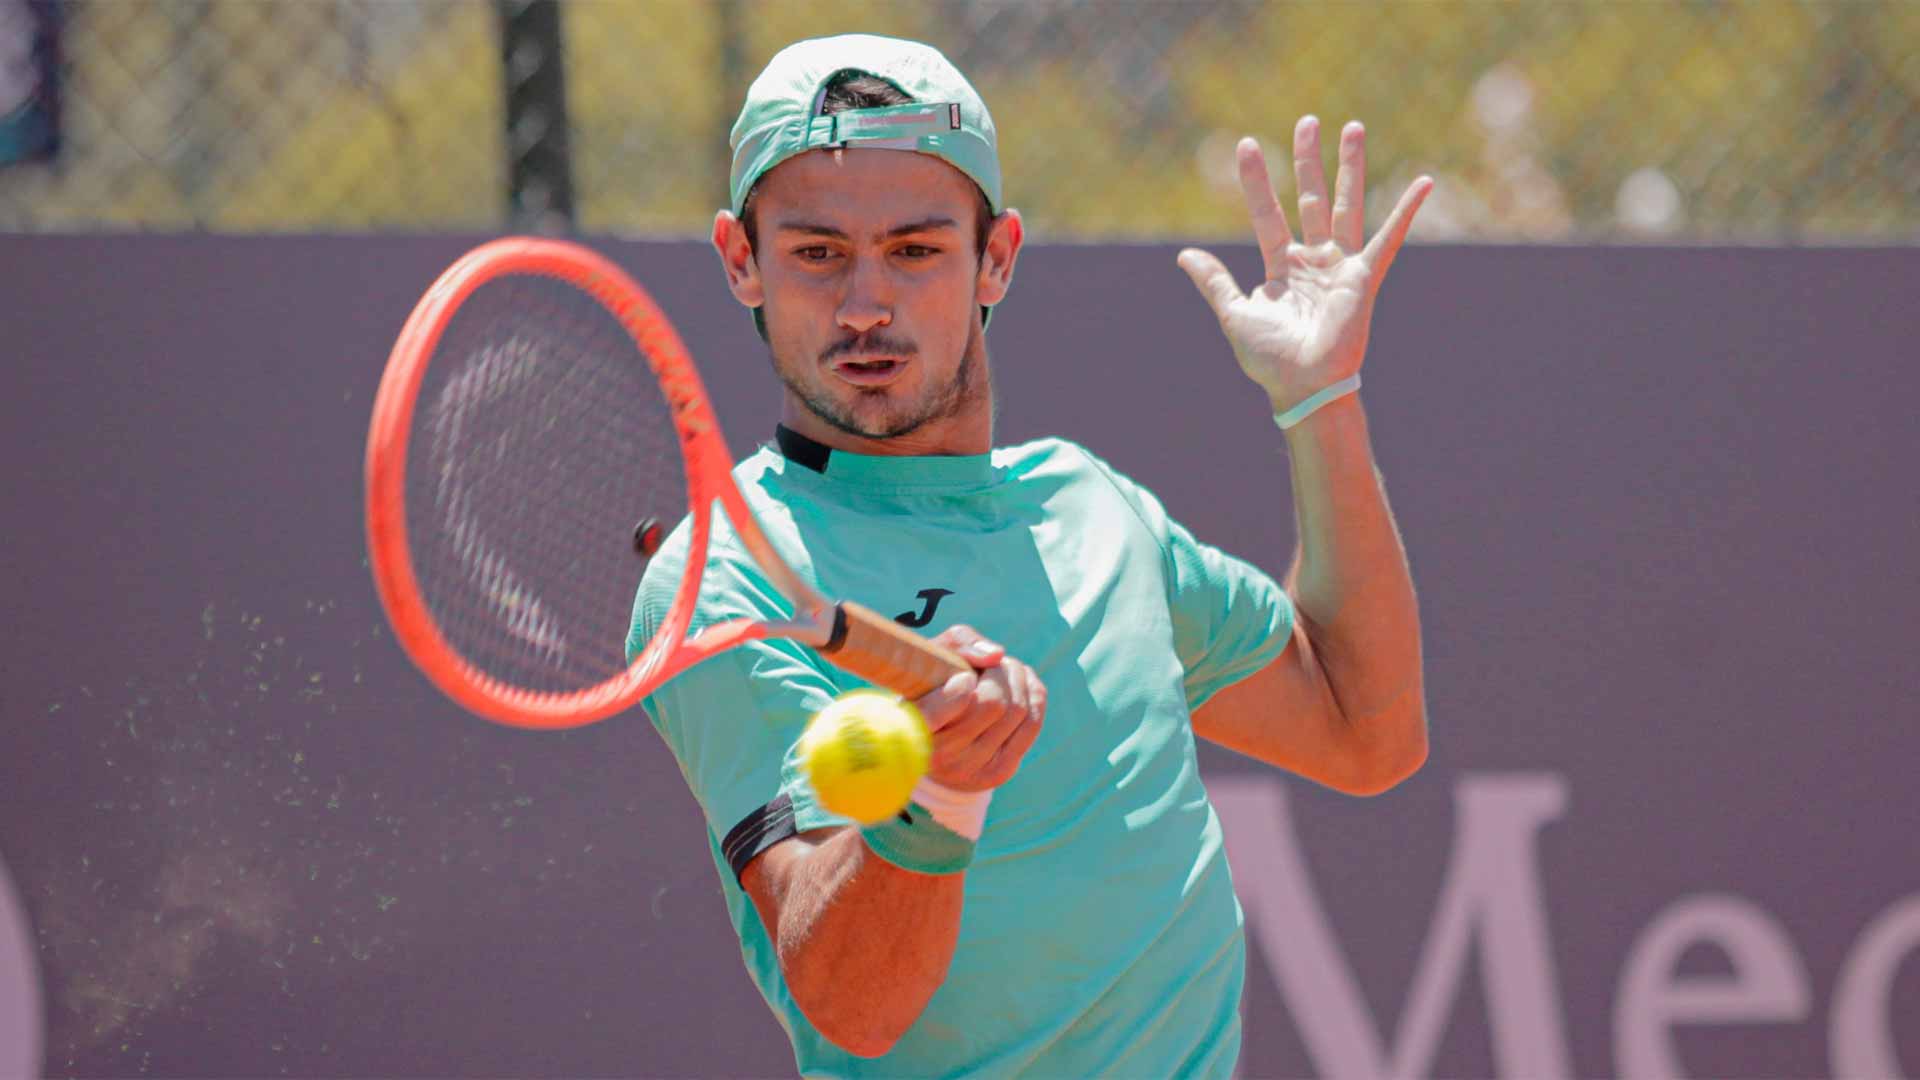 Mariano Navone is a two-time ATP Challenger Tour champion.